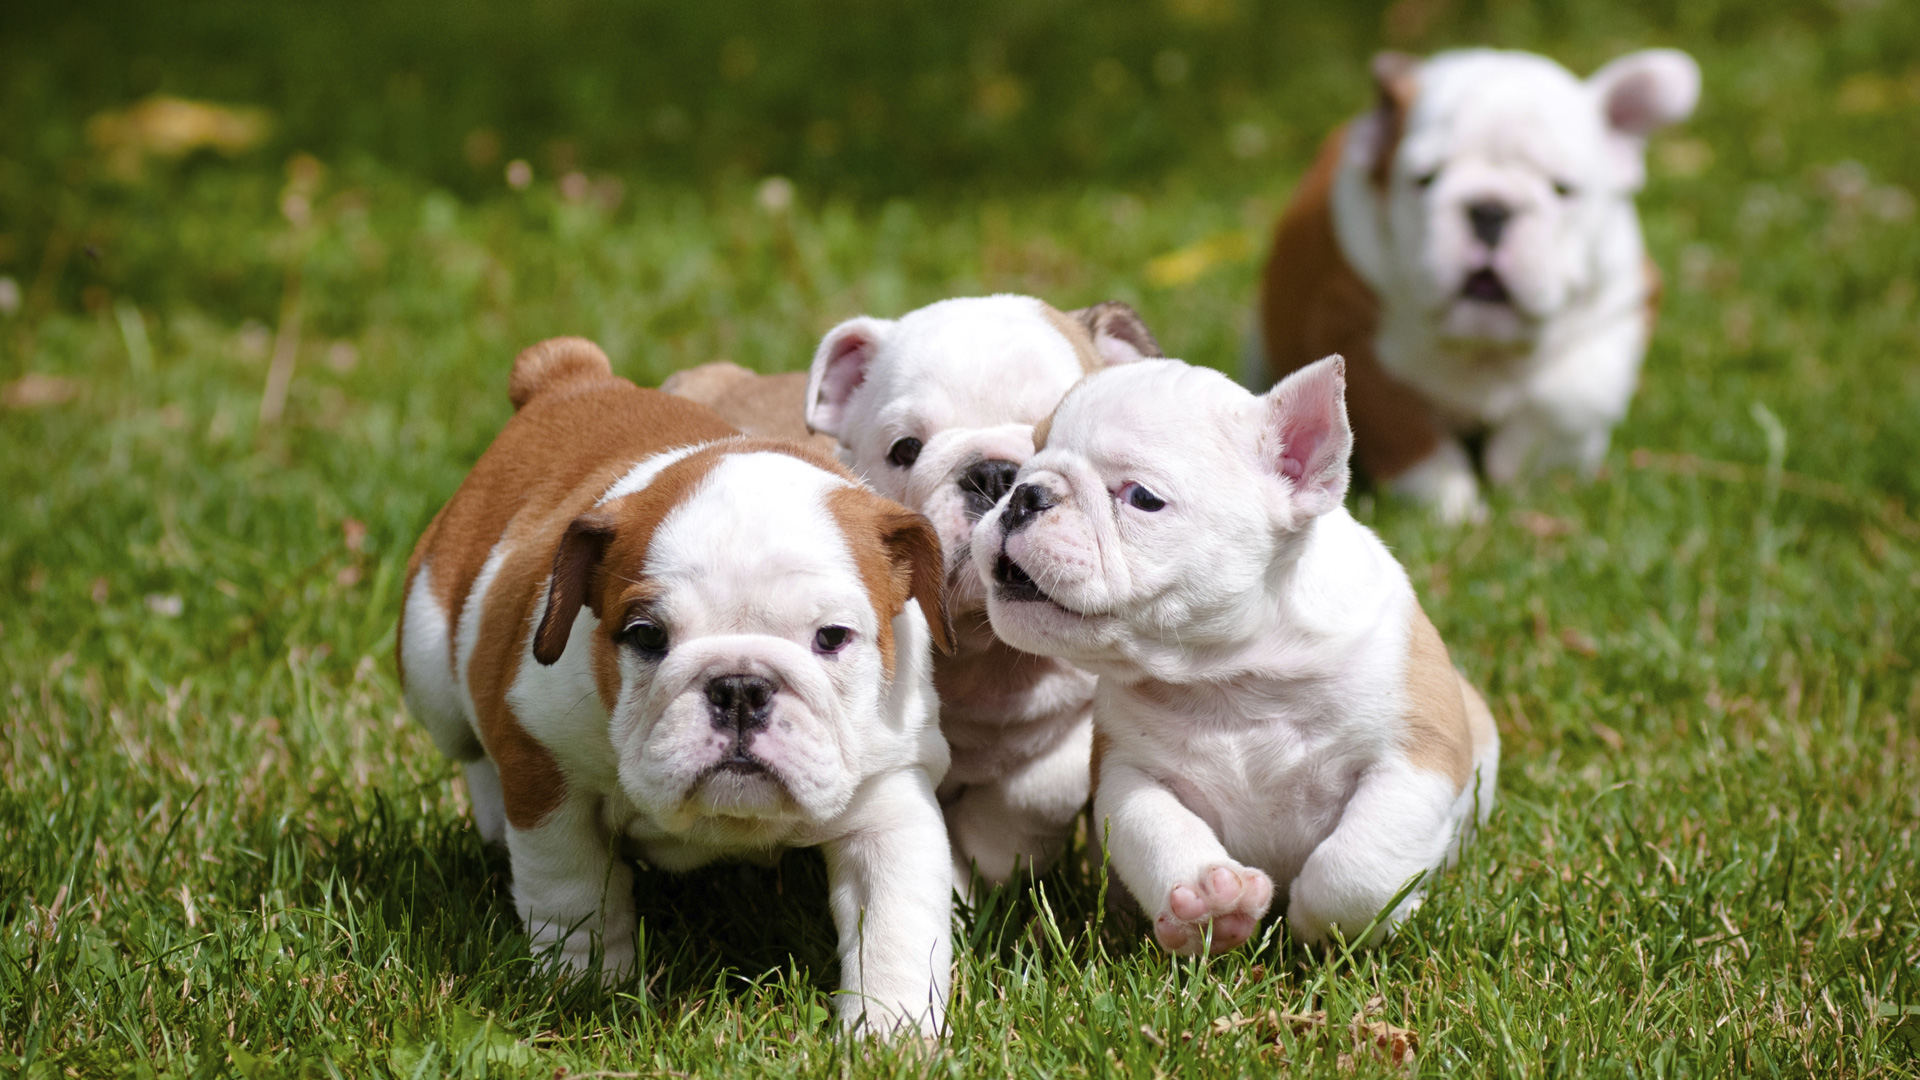 Great Cute English Bulldog Puppies of the decade Check it out now 